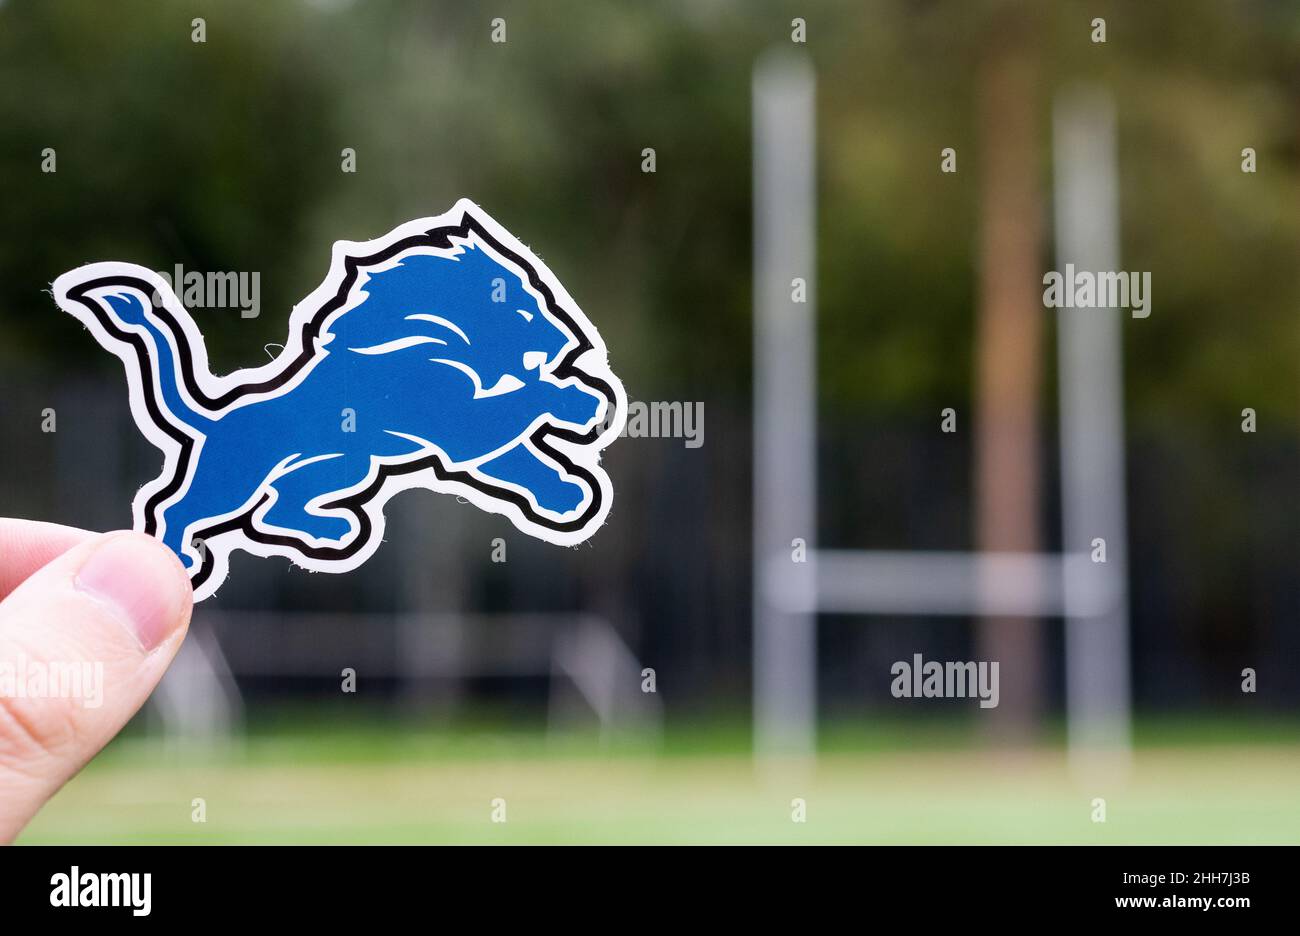 September 16, 2021, Detroit, Michigan. The emblem of a professional American football team Detroit Lions based in Detroit at the sports stadium. Stock Photo